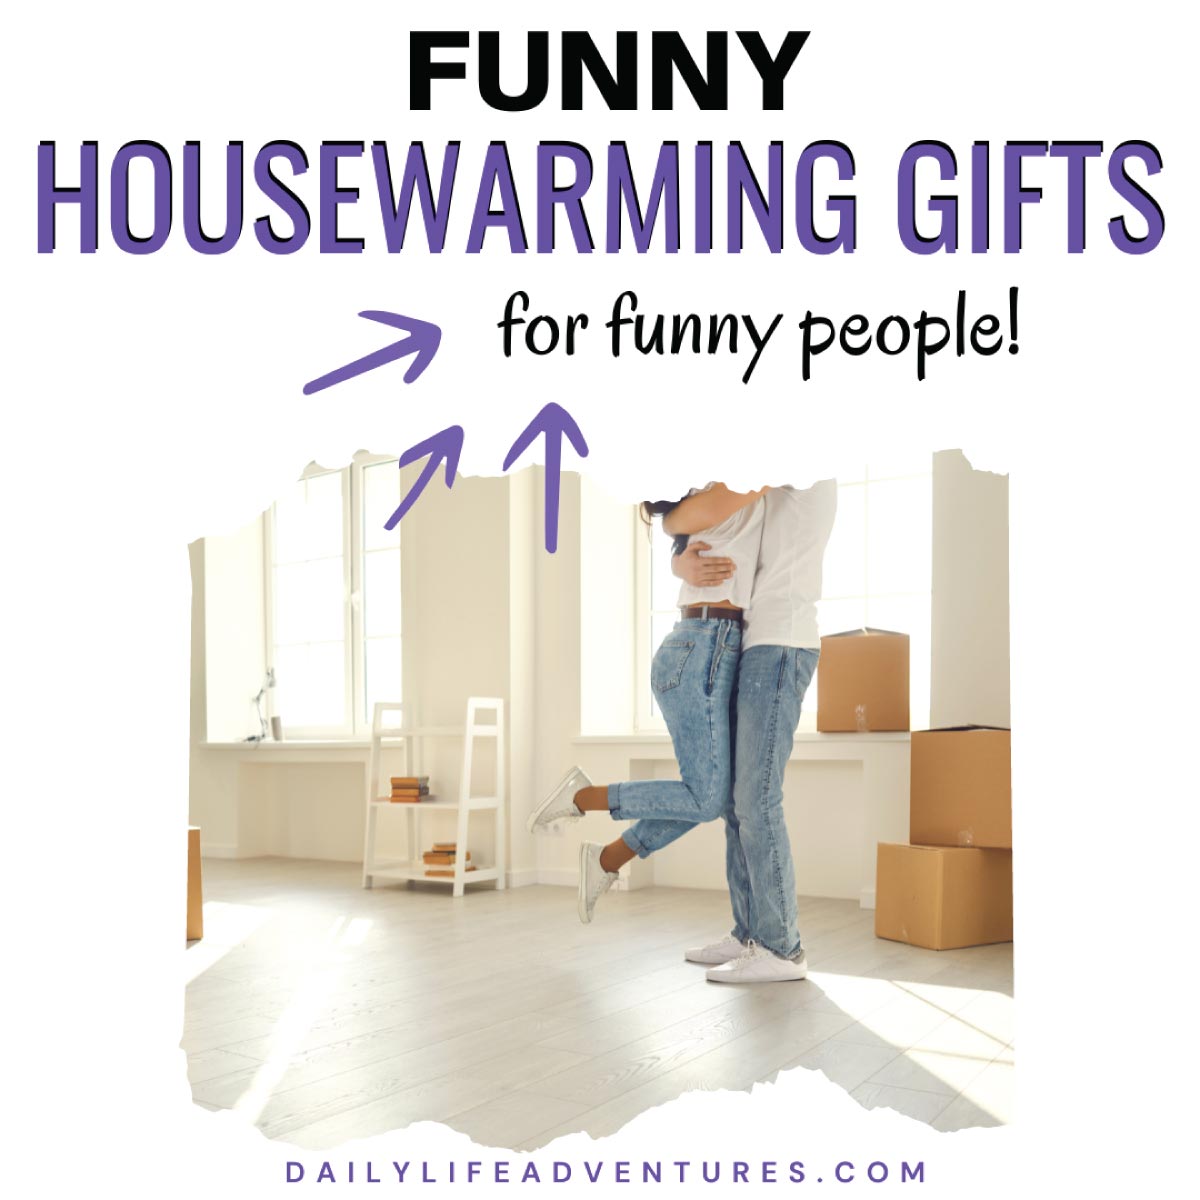 Funny Housewarming Gifts For The New Home